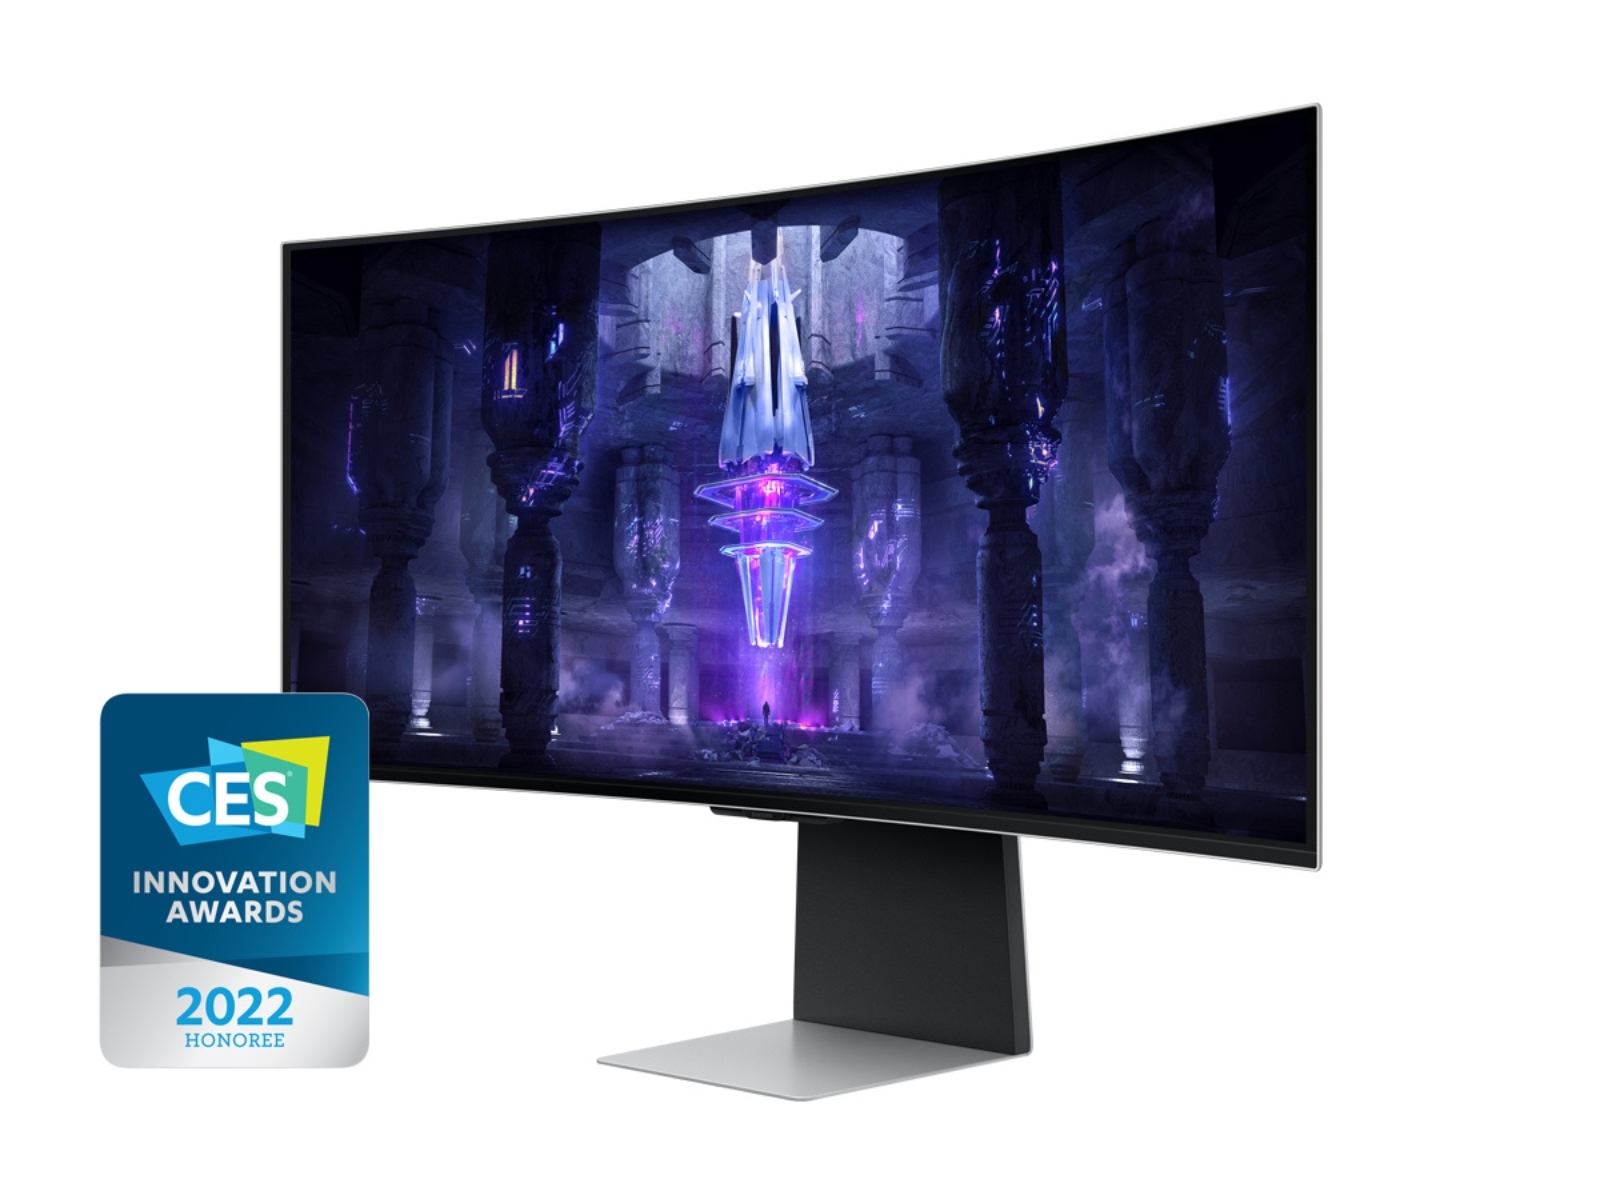 Samsung EPP: 34" G85SB OLED 3440x1440 0.03ms 175Hz Curved Smart Gaming Monitor with EPP discount $1040